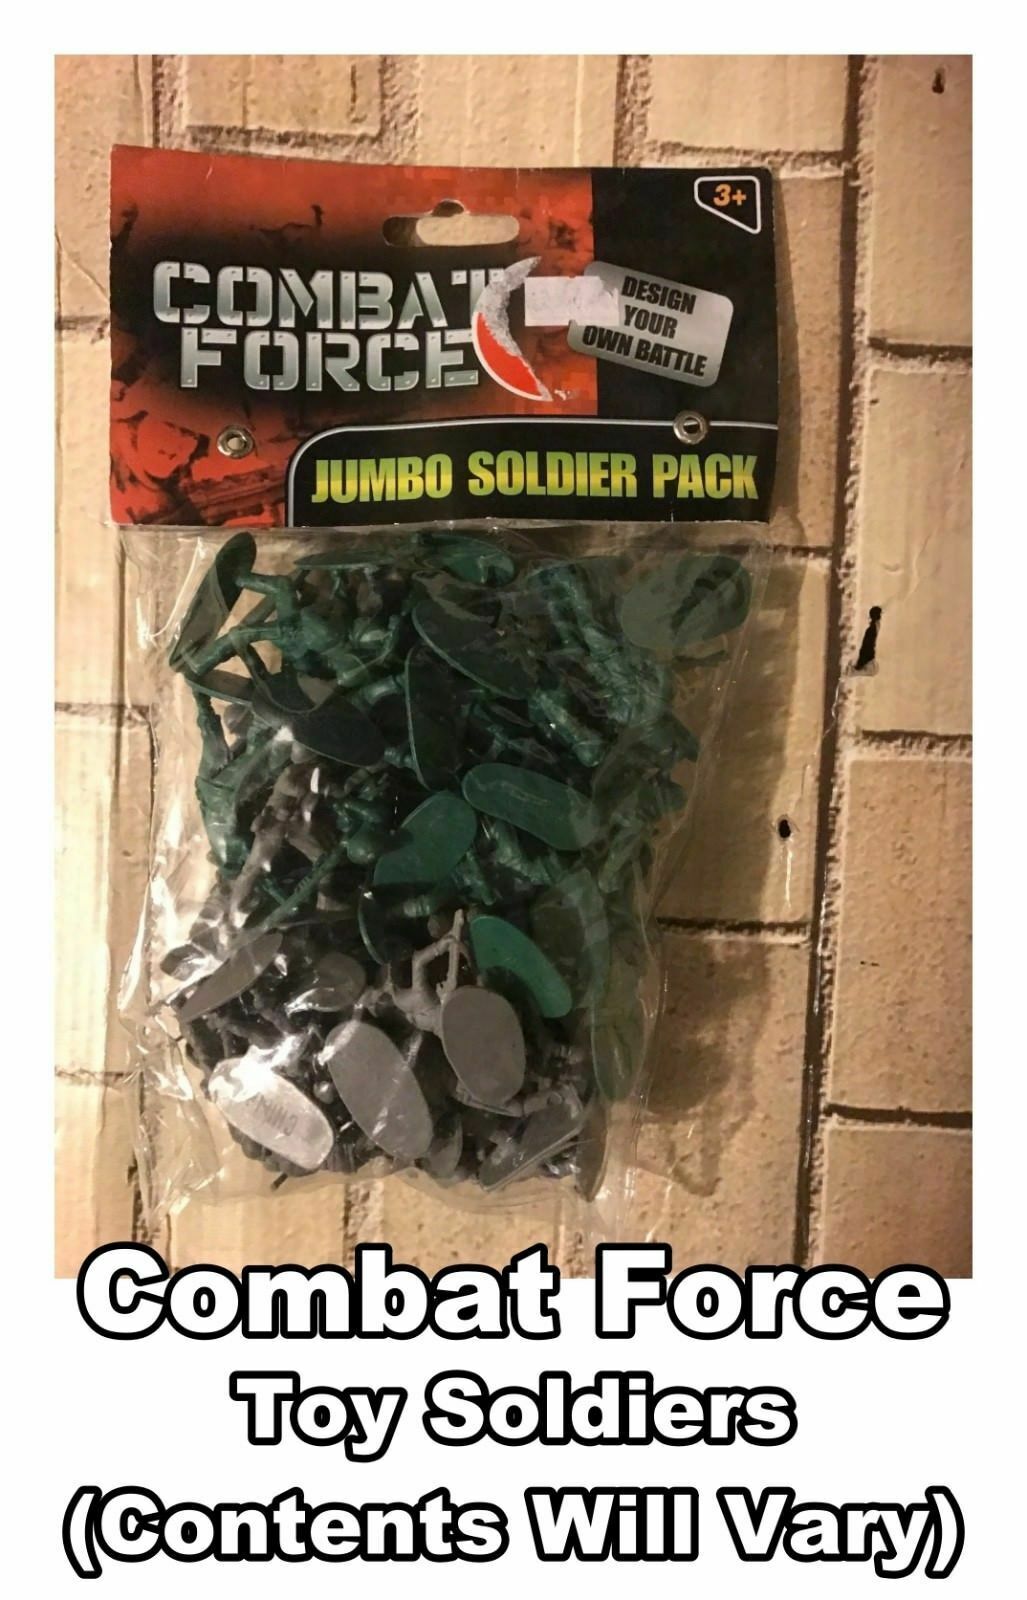 COMBAT FORCE JUMBO SOLDIER PACK - NEW SEALED